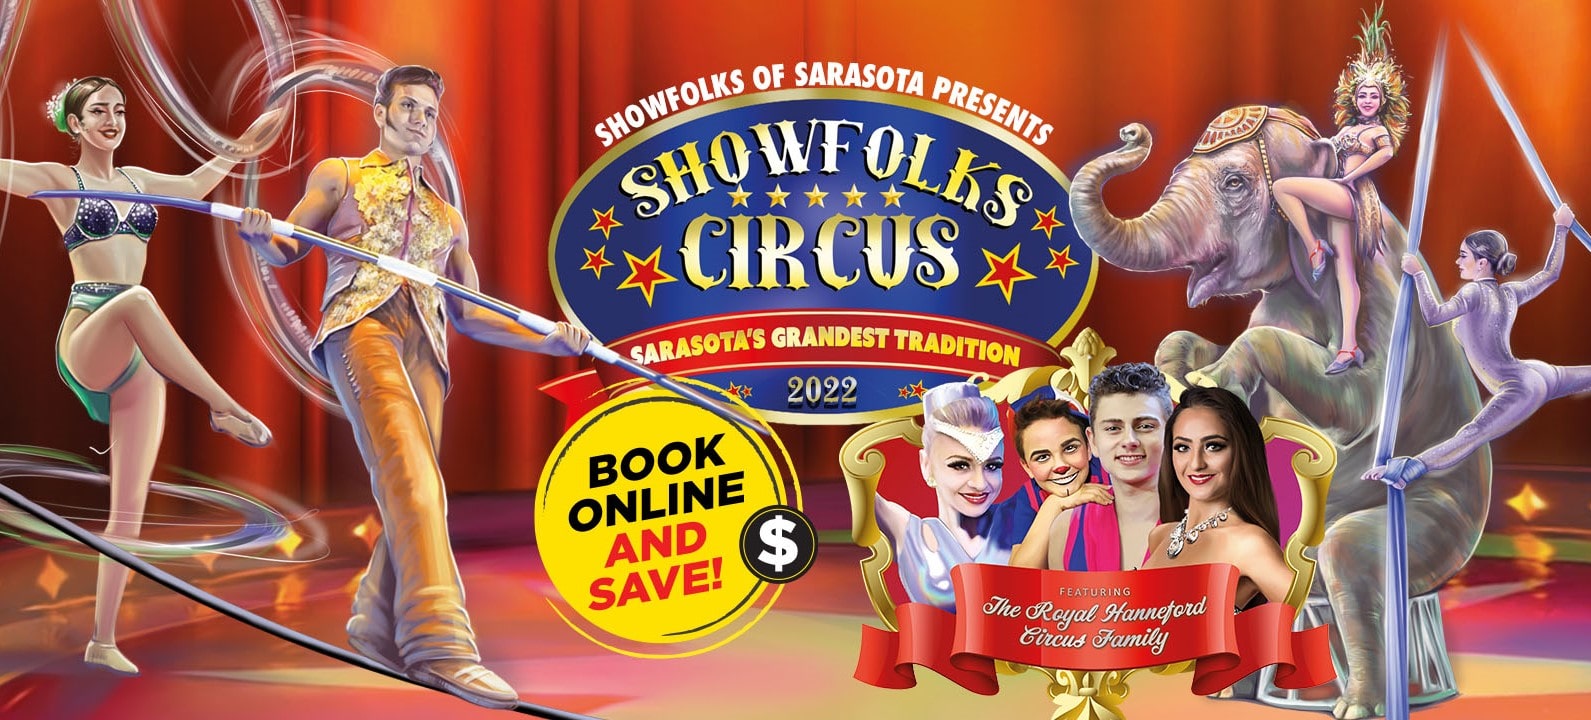 10-facts-you-must-know-about-showfolks-circus